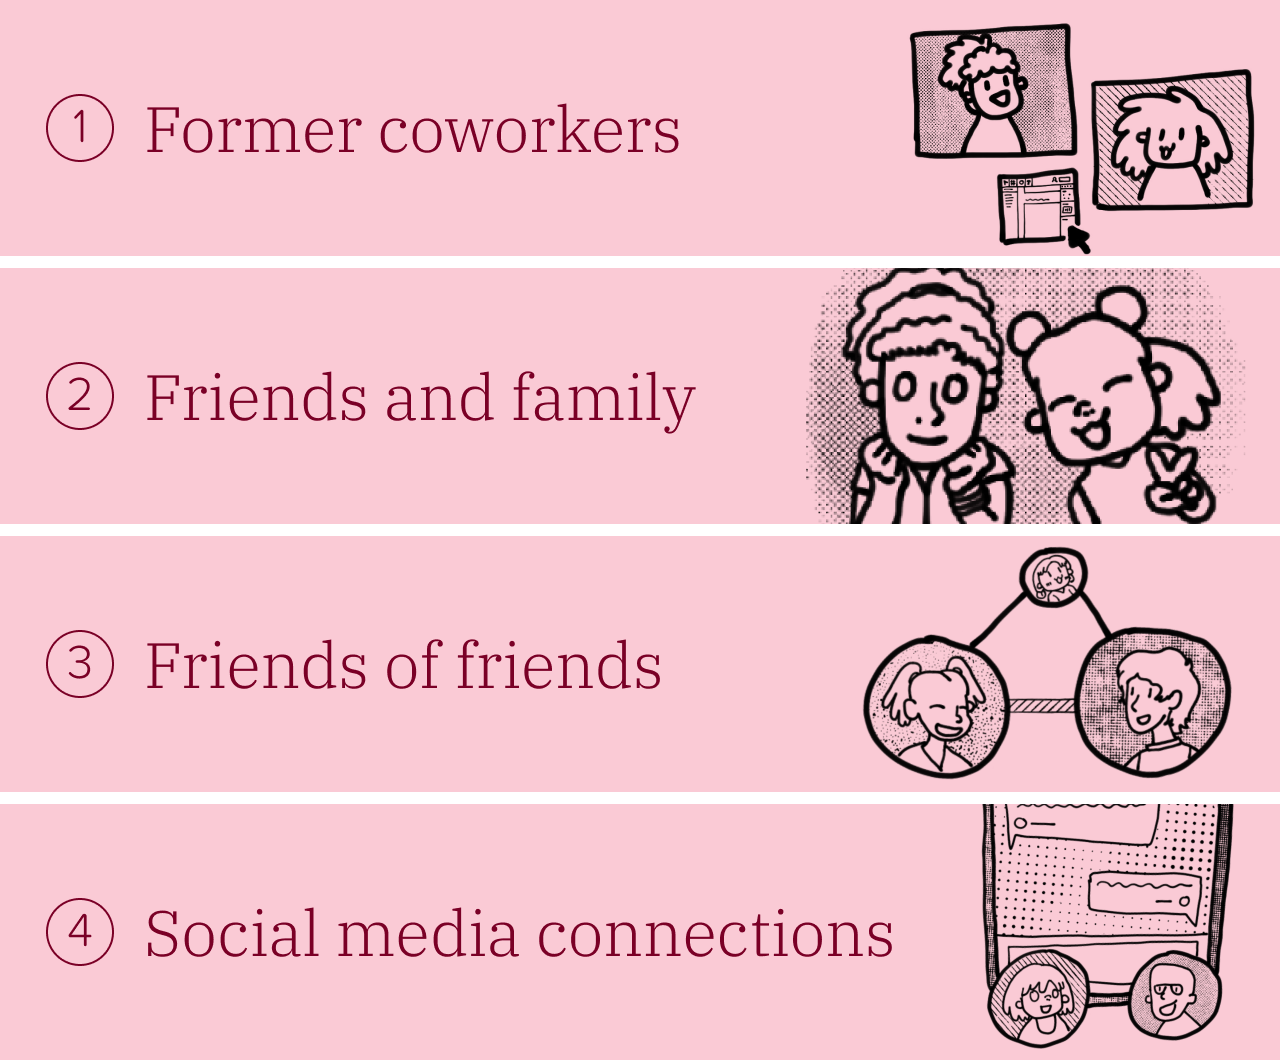 Former coworkers, friends and family, friends of friends, and social media connections